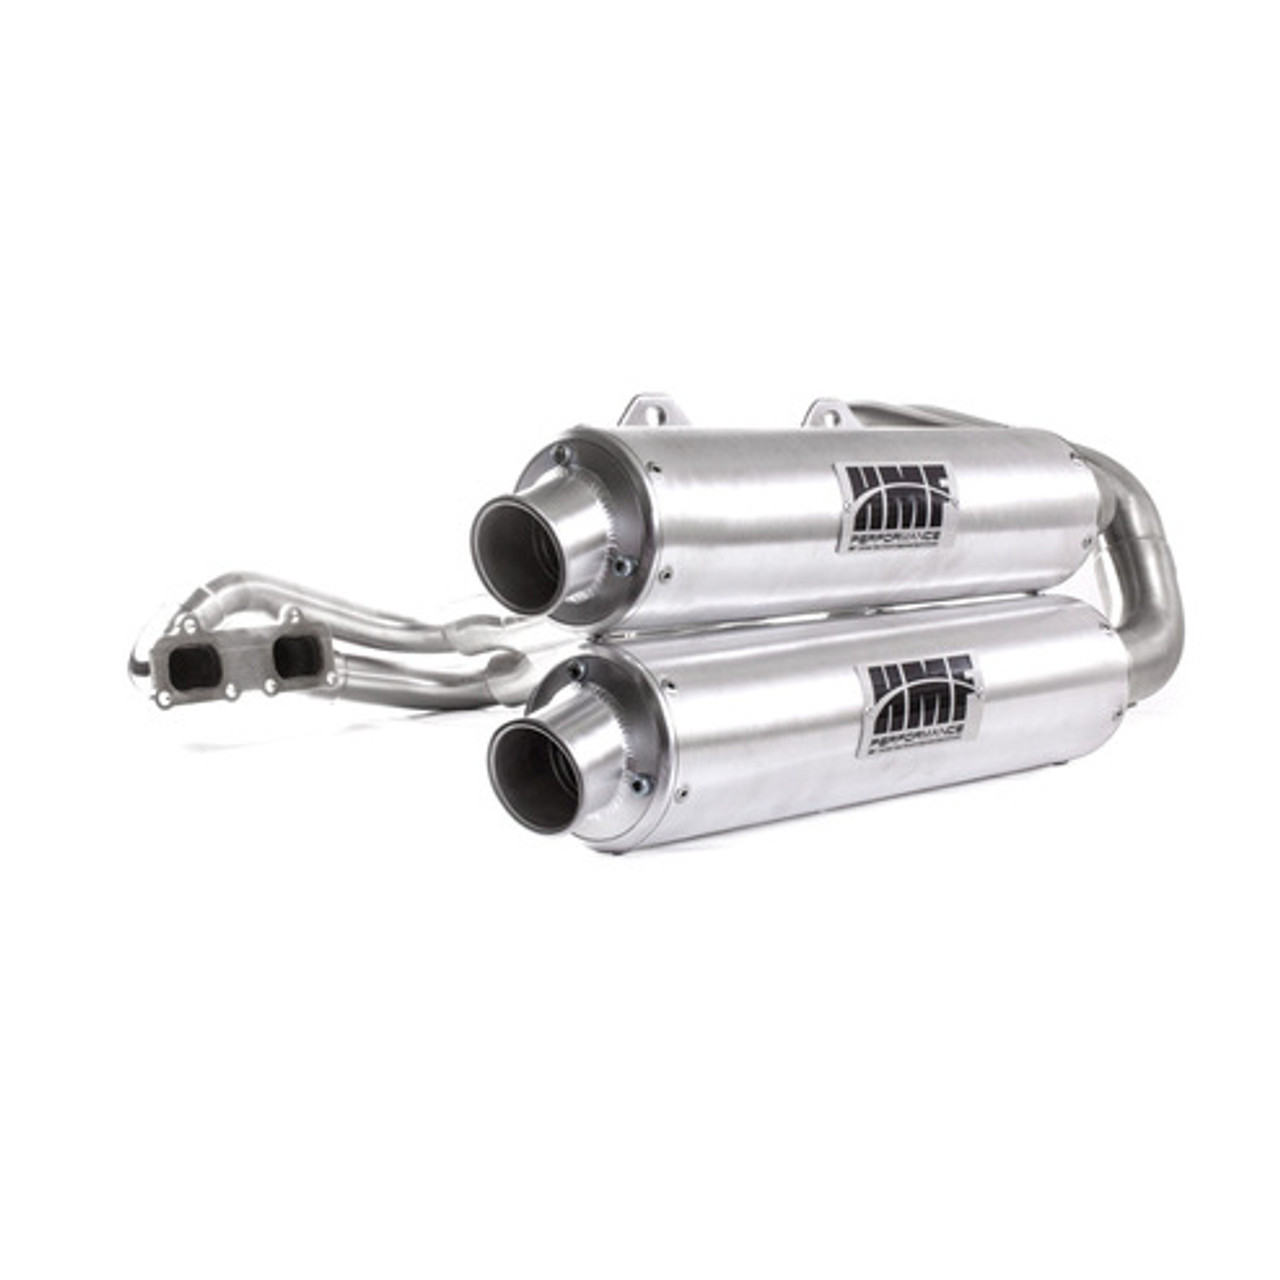 Polaris® General™ Exhaust Systems - Performance